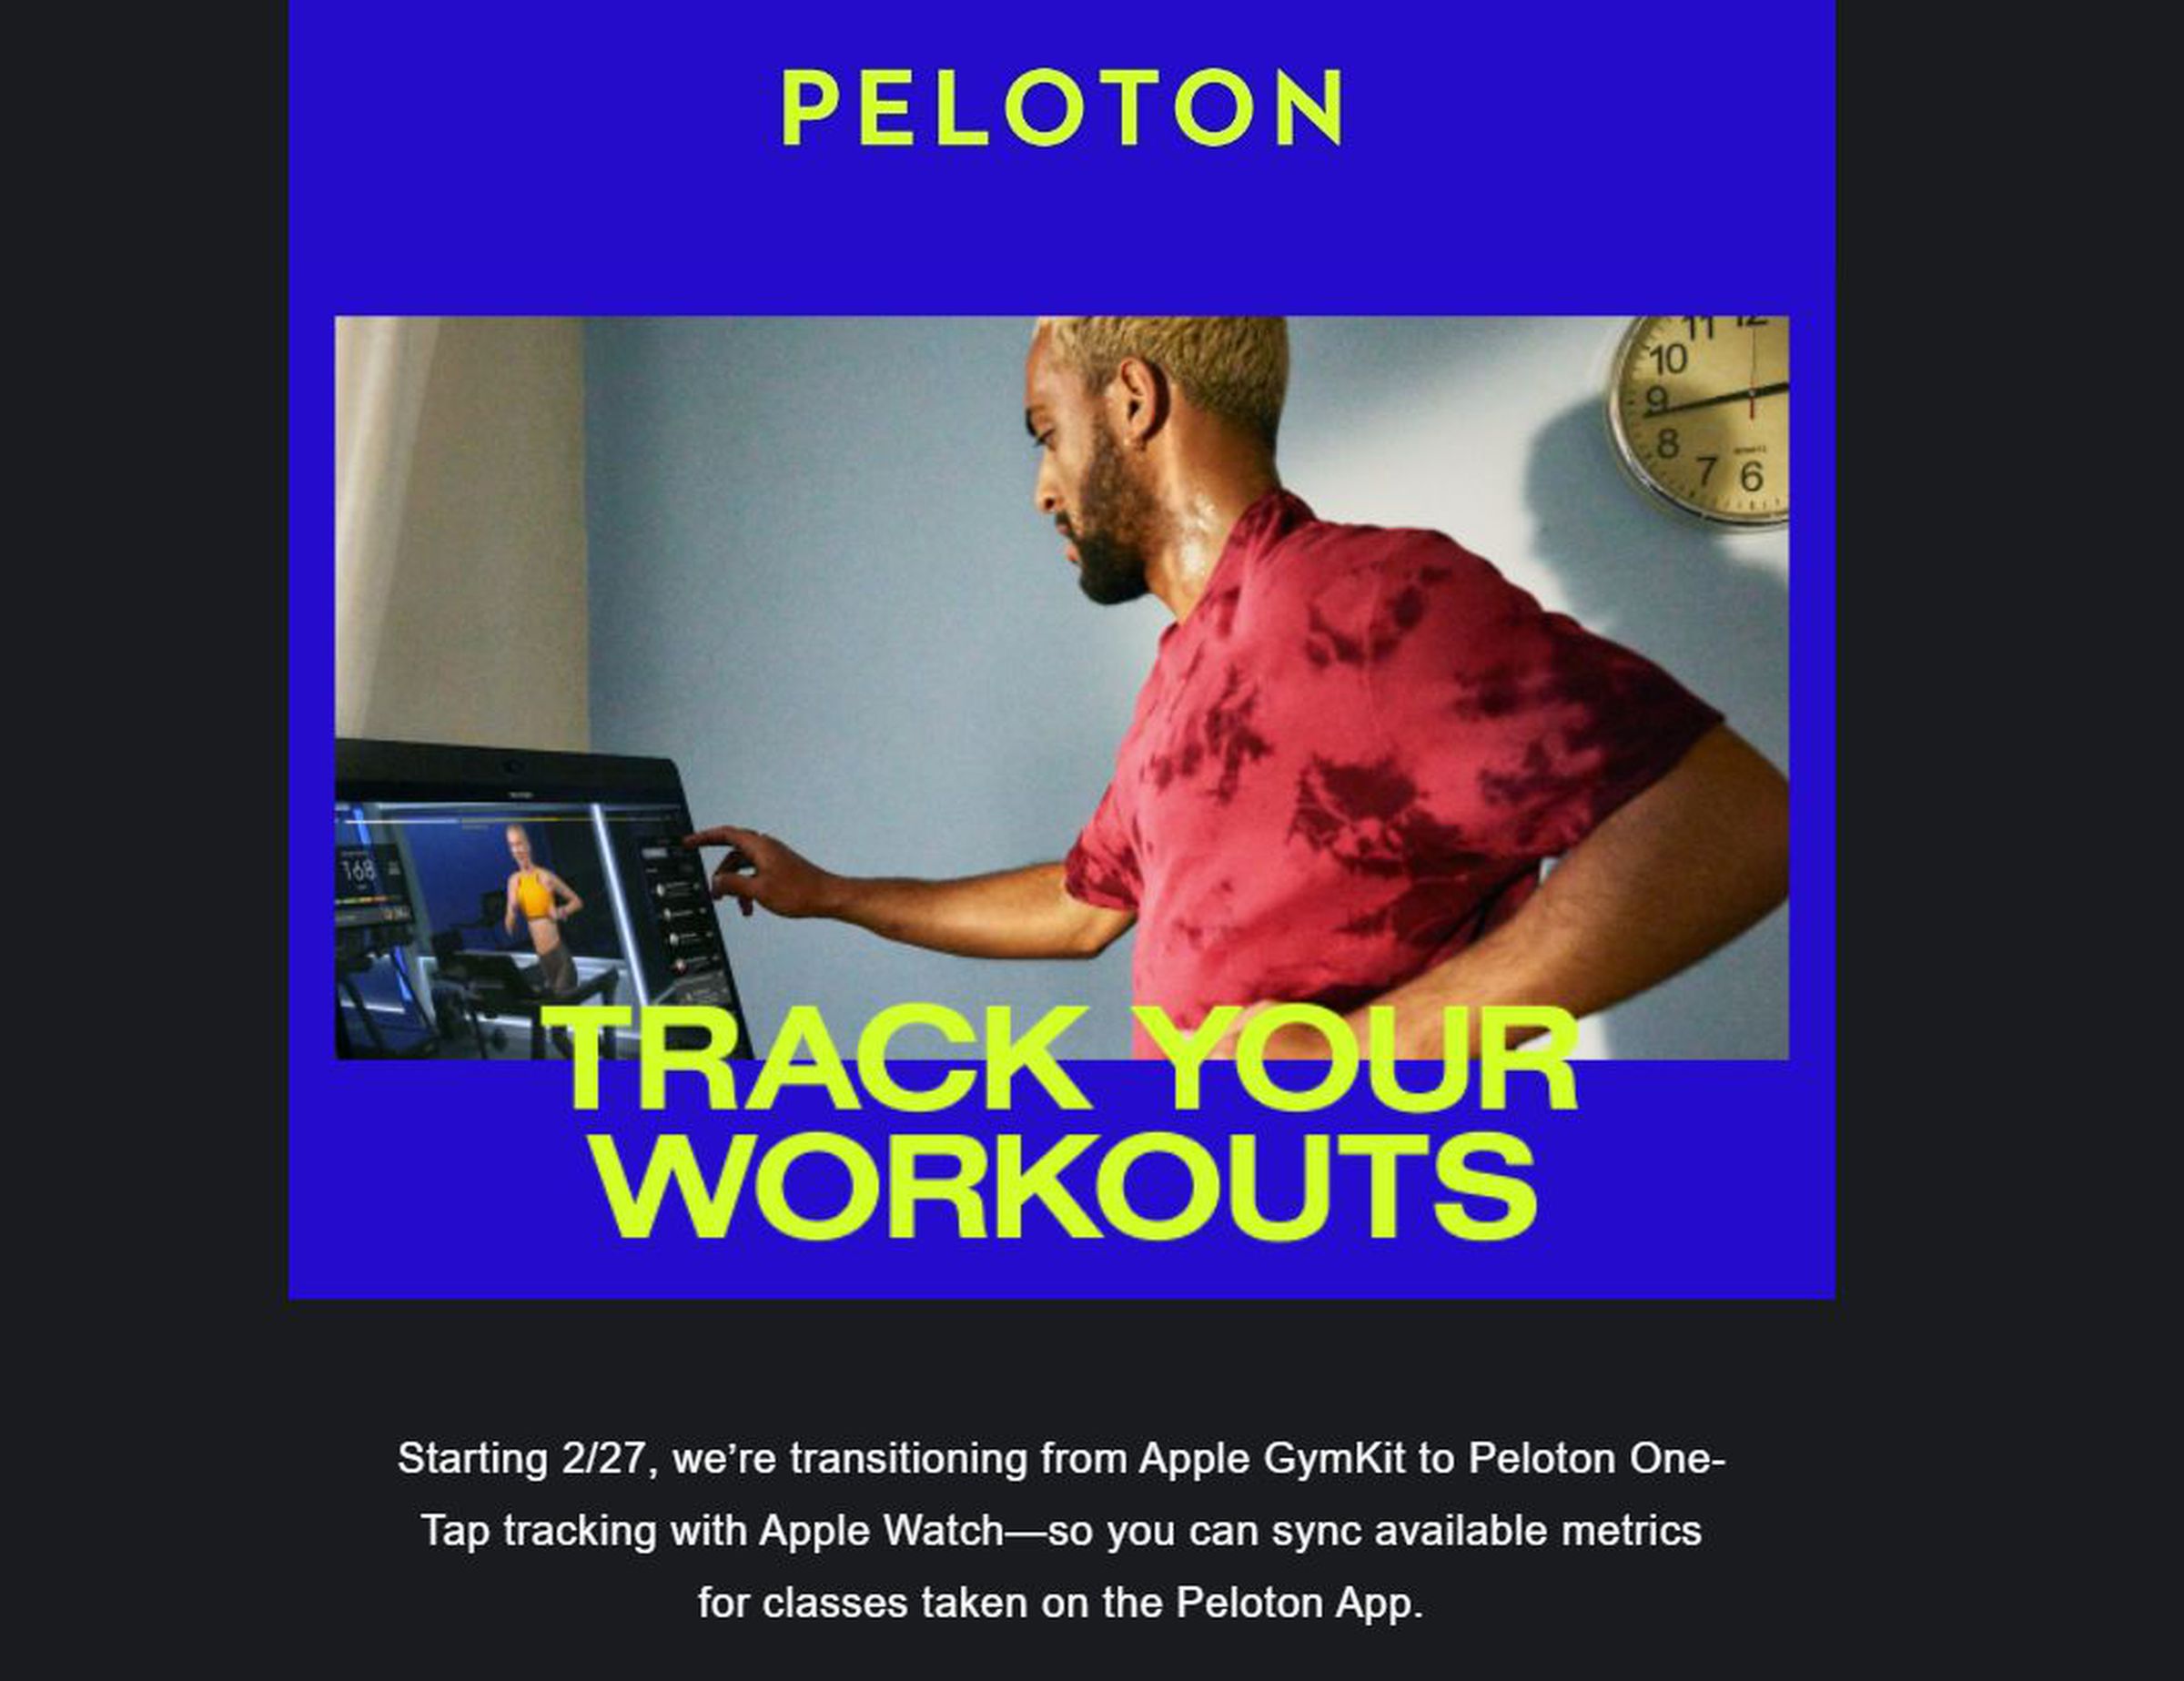 Image of a person working out, with a message underneath reading “Starting 2/27, we’re transitioning from Apple GymKit to Peloton One-Tap tracking with Apple Watch—so you can sync available metrics for classes taken on the Peloton App.”